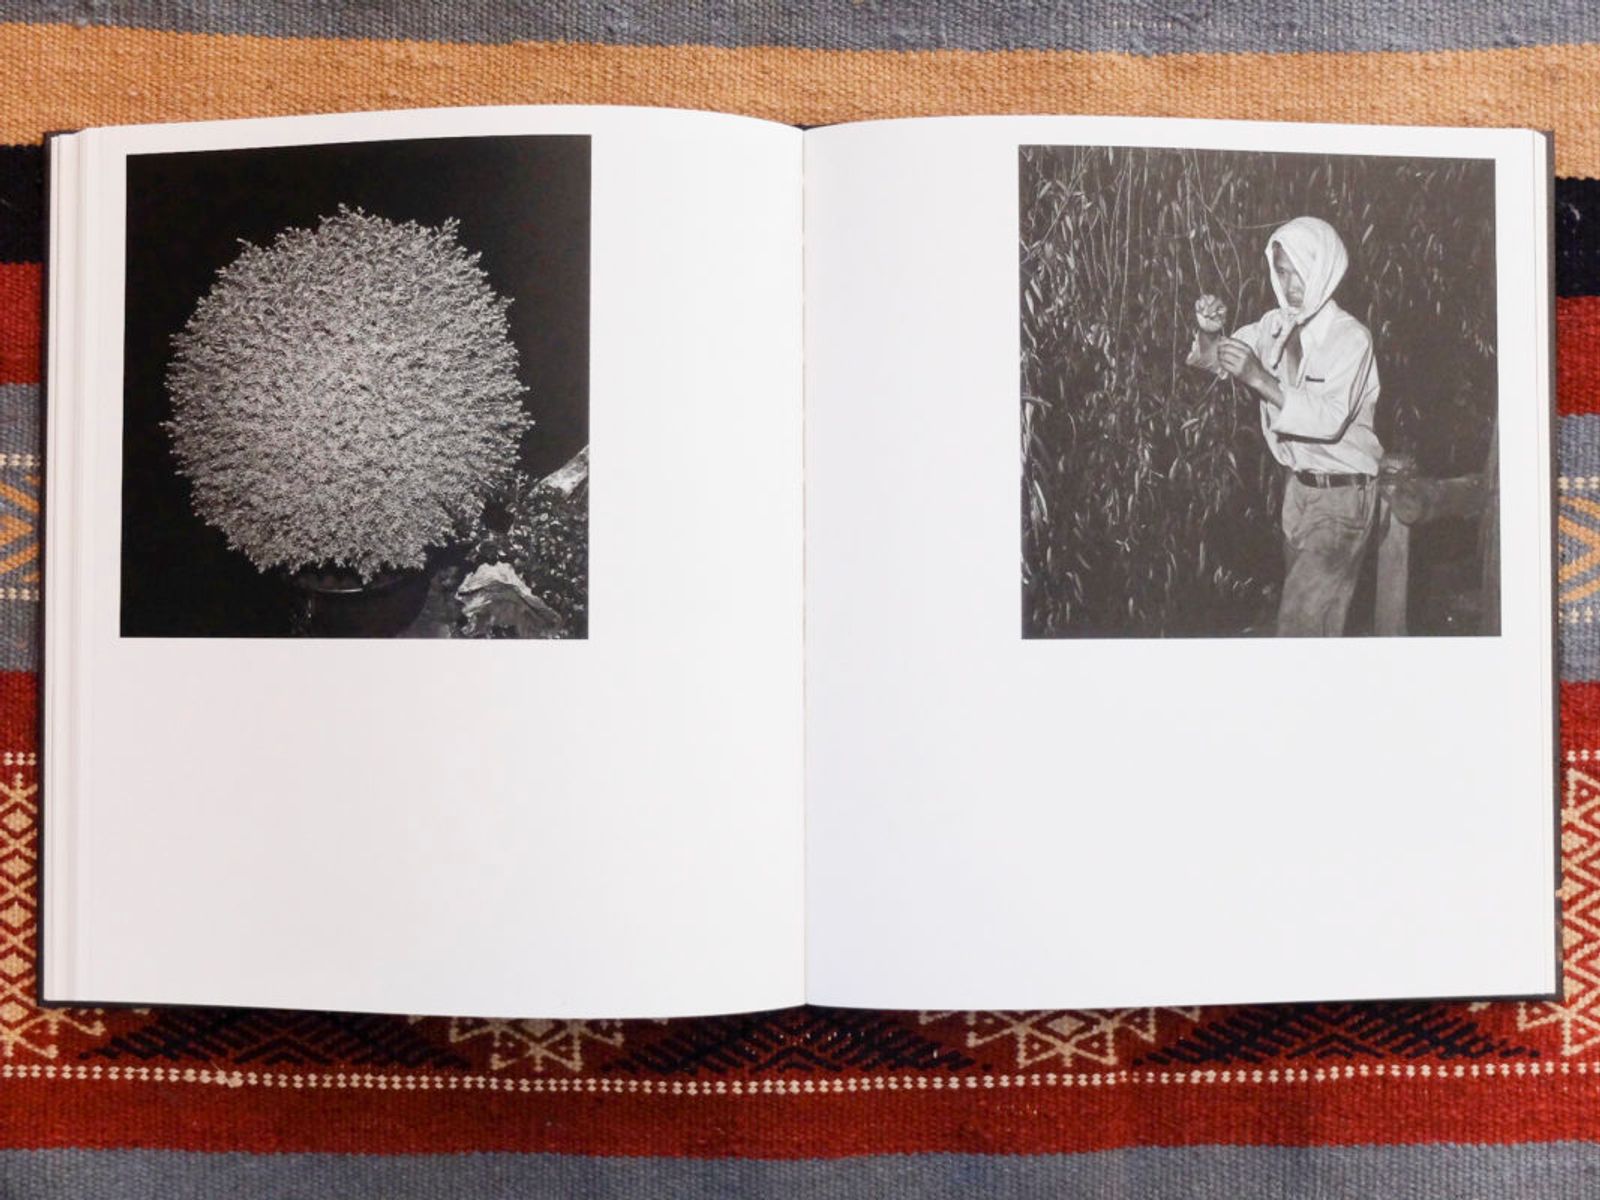 © Leporello Books - Image from the 78 by Issei Suda photography project